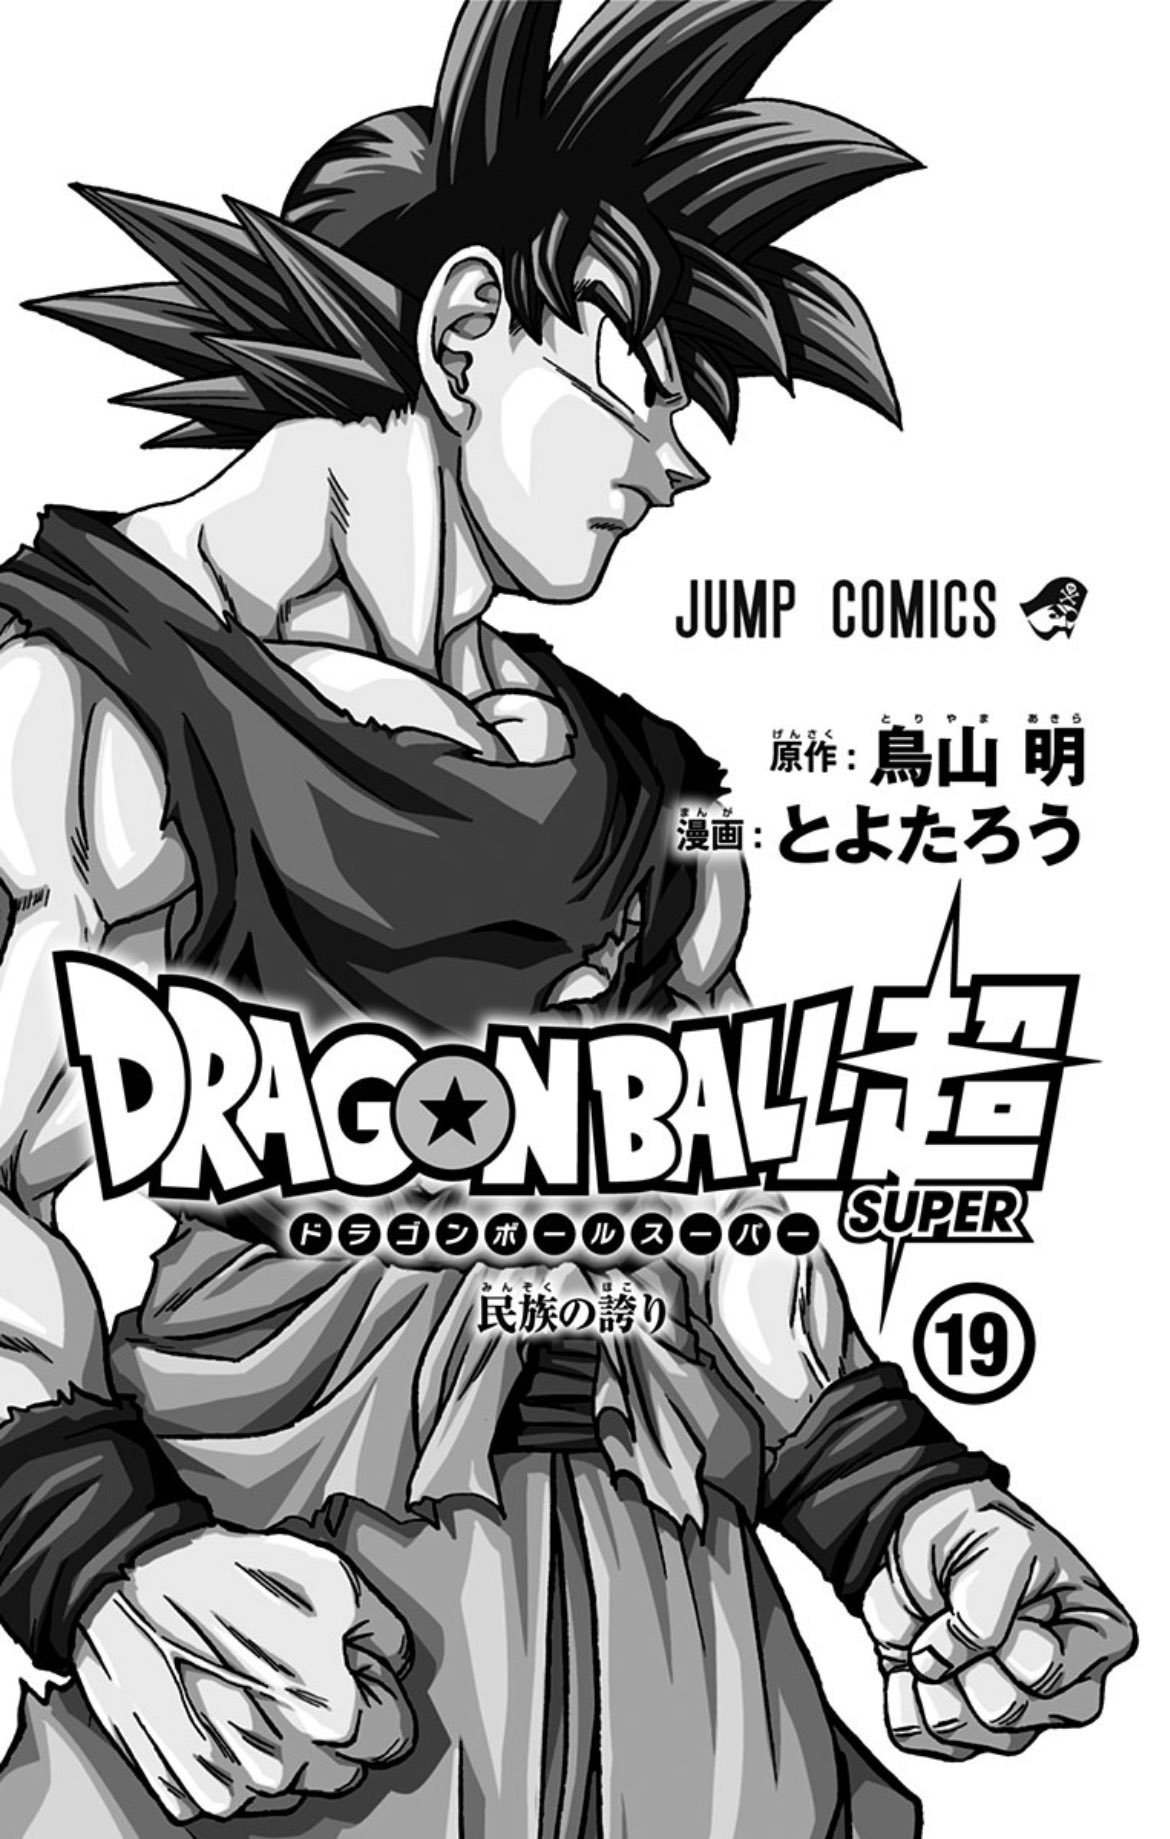 Hype on X: Dragon Ball Super Volume 19 Inside Cover. New Goku illustration  by Toyotaro!  / X